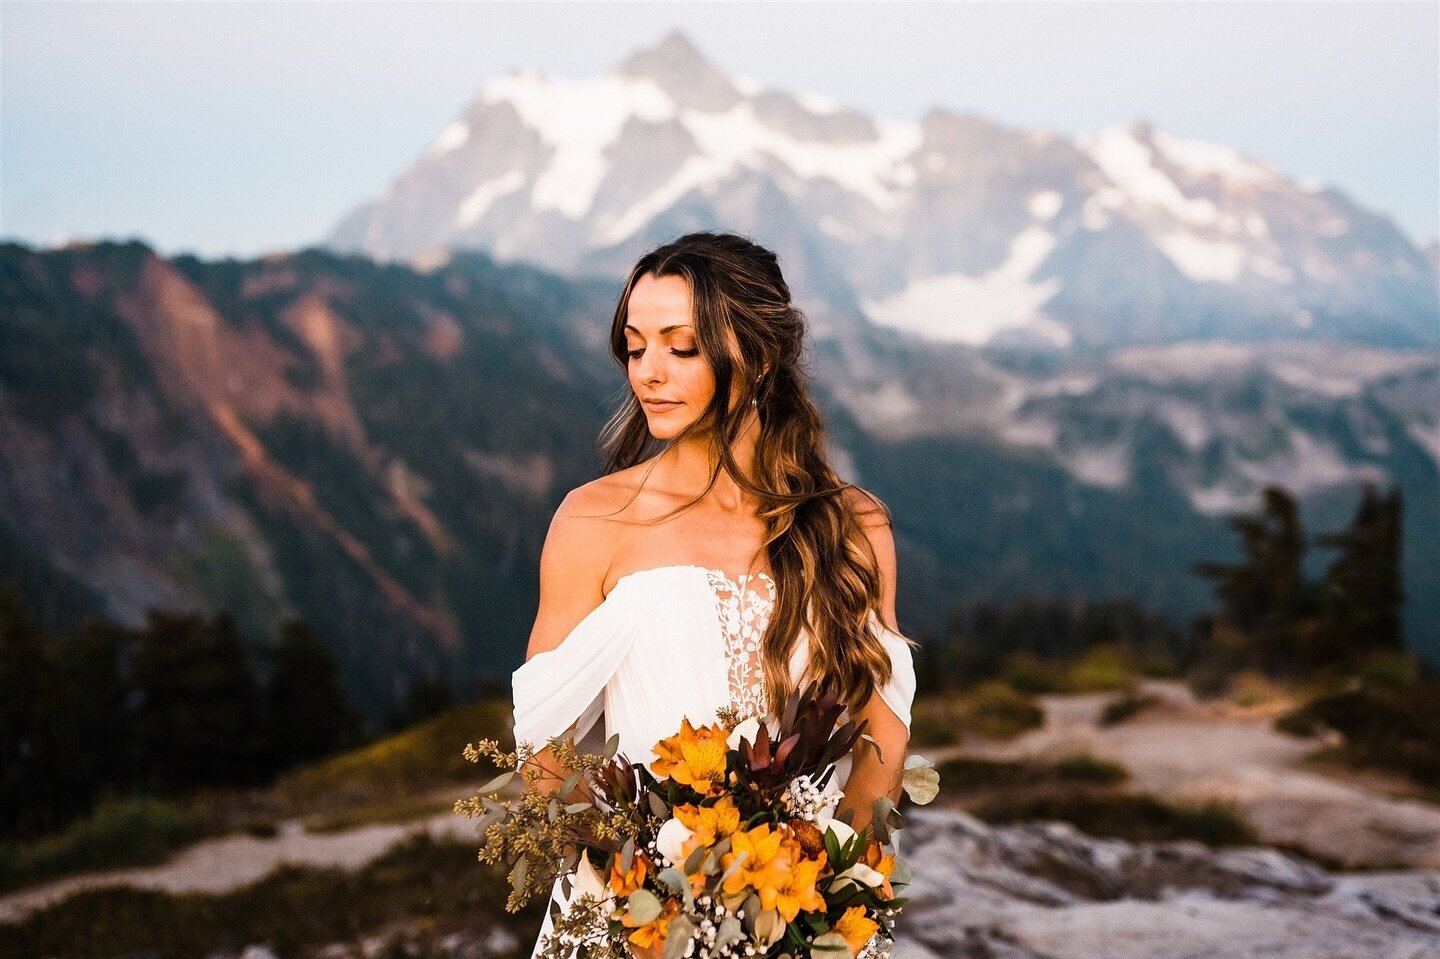 The mountains make such a stunning backdrop for an elopement 🤎✨️⁠
⁠
We love getting to see the beautiful scenery that our brides and their loved ones got to experience on their elopement day!⁠
⁠
Hair + Makeup @beautybykaitjoy⁠
Photo by @zoesteindl @